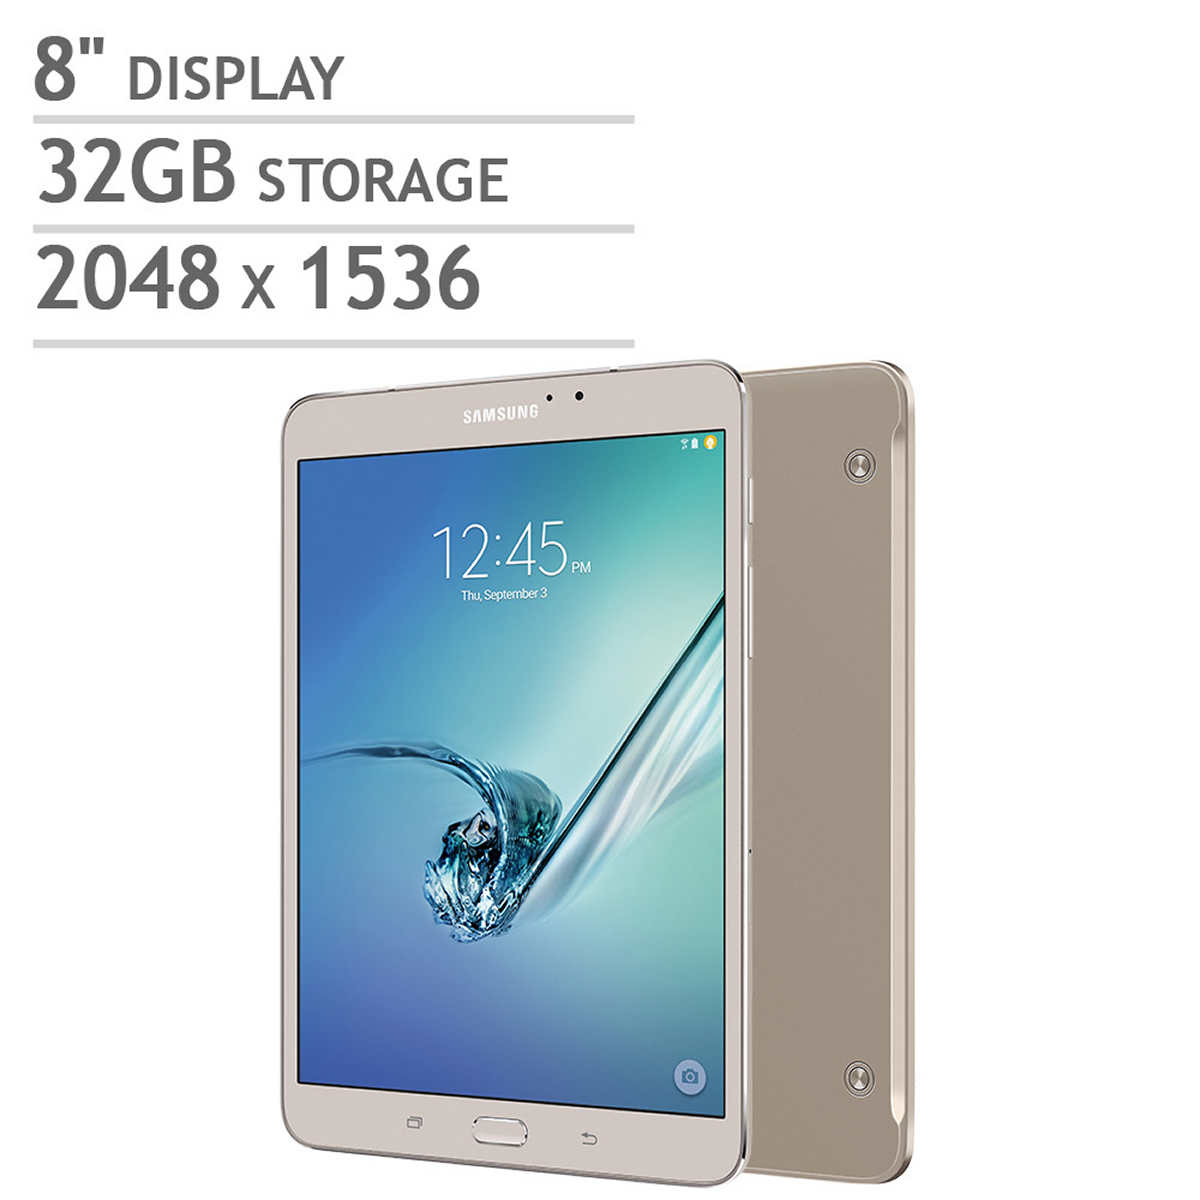 Samsung Galaxy Tab S2 Wi-Fi Tablet - Octa Core - Android ...